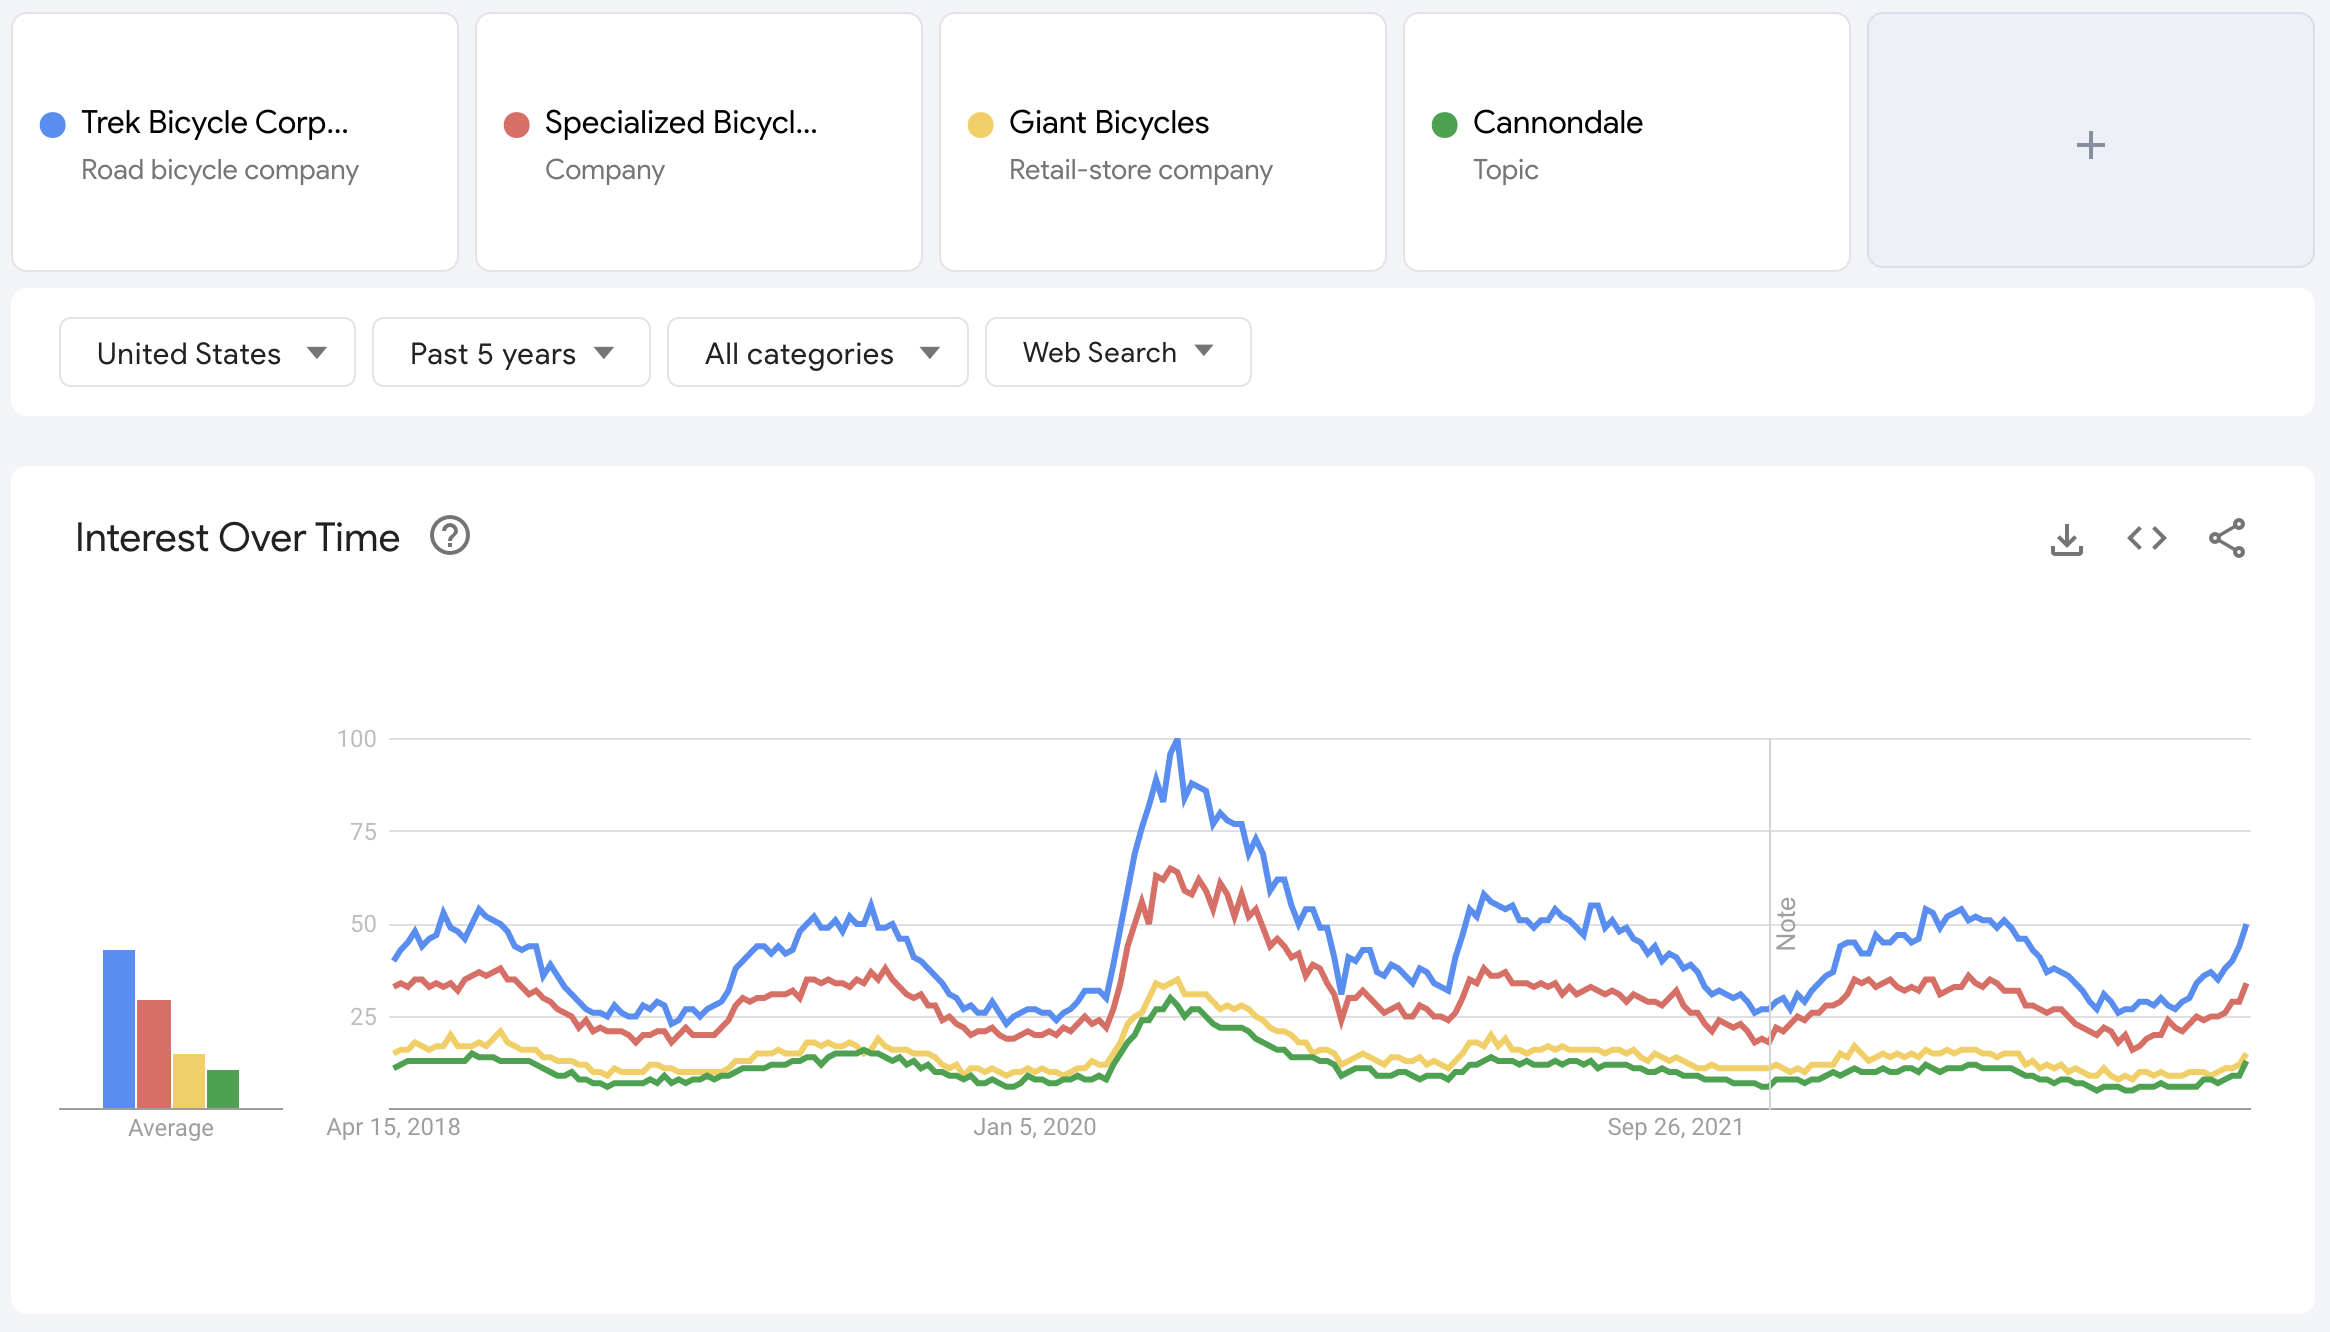 A screenshot from Google Trends showing interest in bike brands Trek, Specialized, Giant, and Coannondale as topics over time.